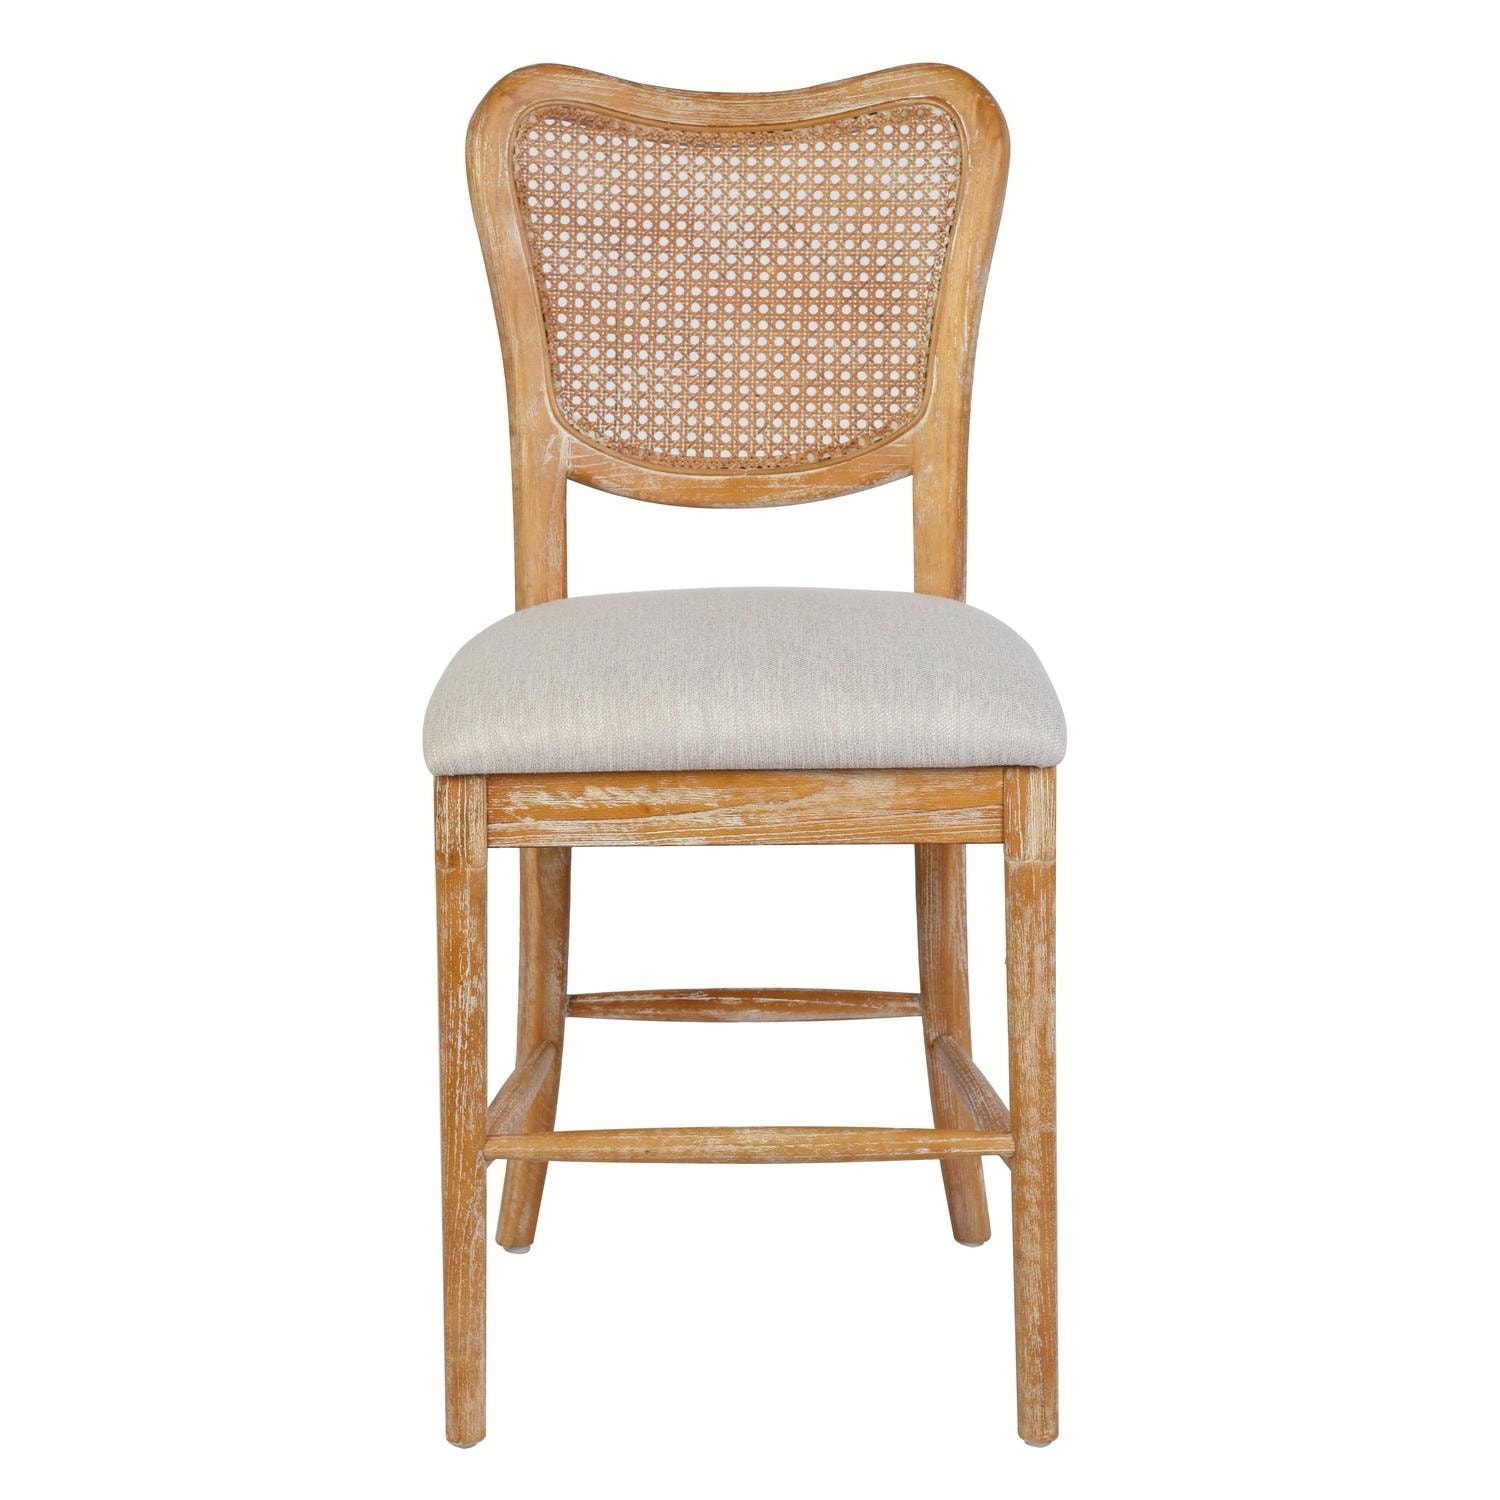 Set of Elegant Rattan Back Chairs: Farmhouse Dining Room Accent Chairs,  French Distressed Design On Sale Bed Bath  Beyond 38143231